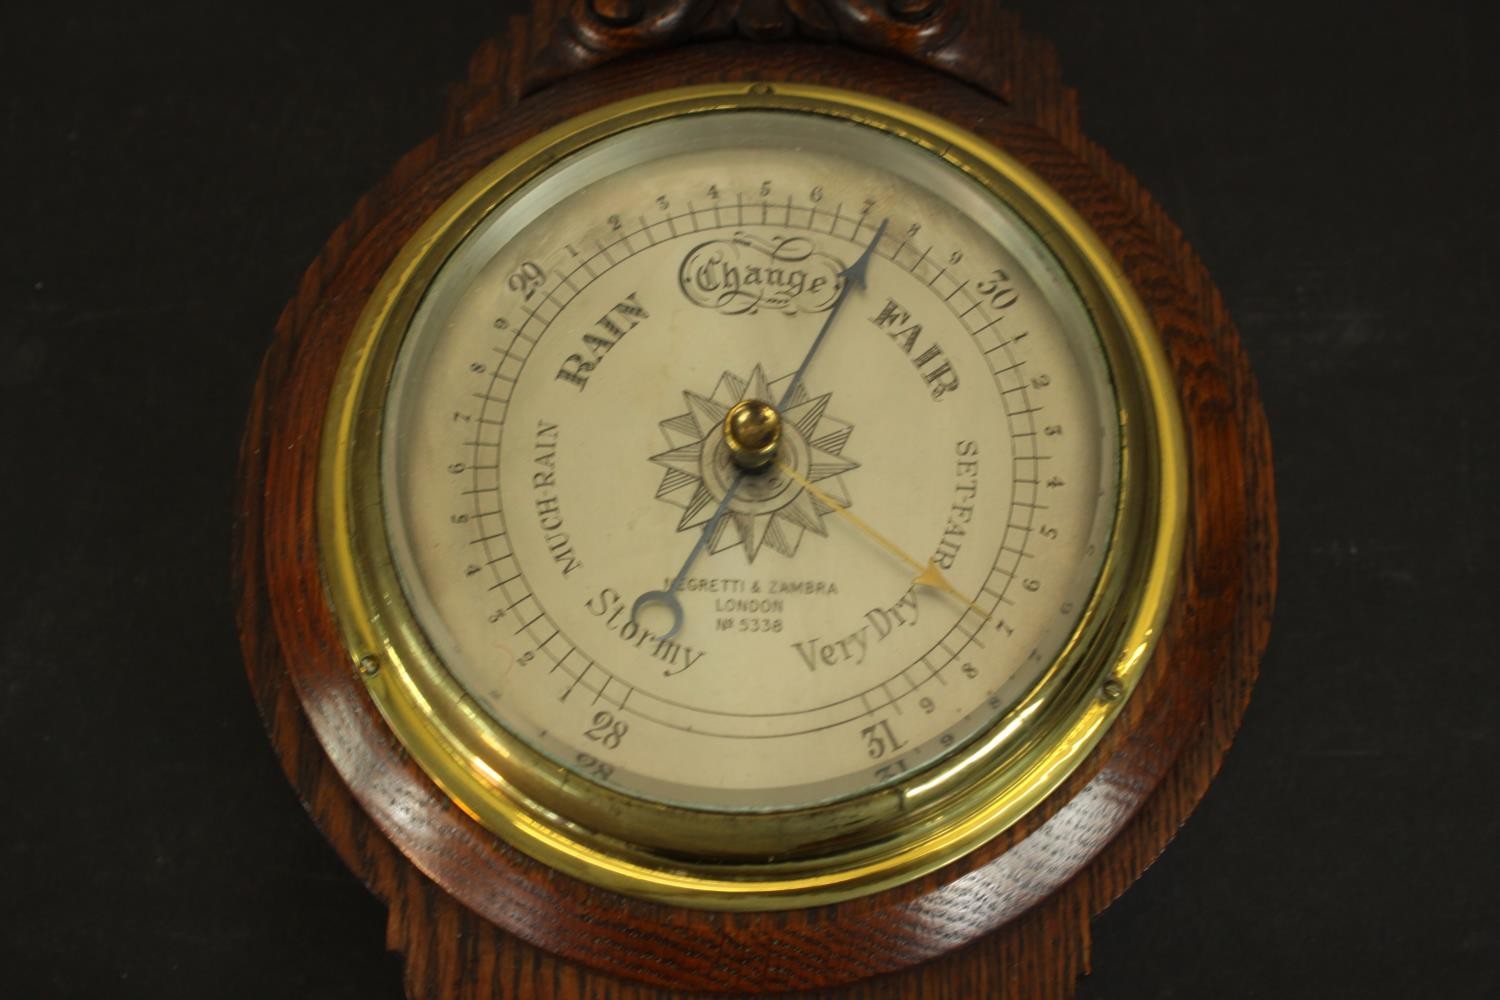 A circa 1900's Negretti & Zamba carved oak barometer and thermometer with shell and flower motifs. - Image 4 of 7